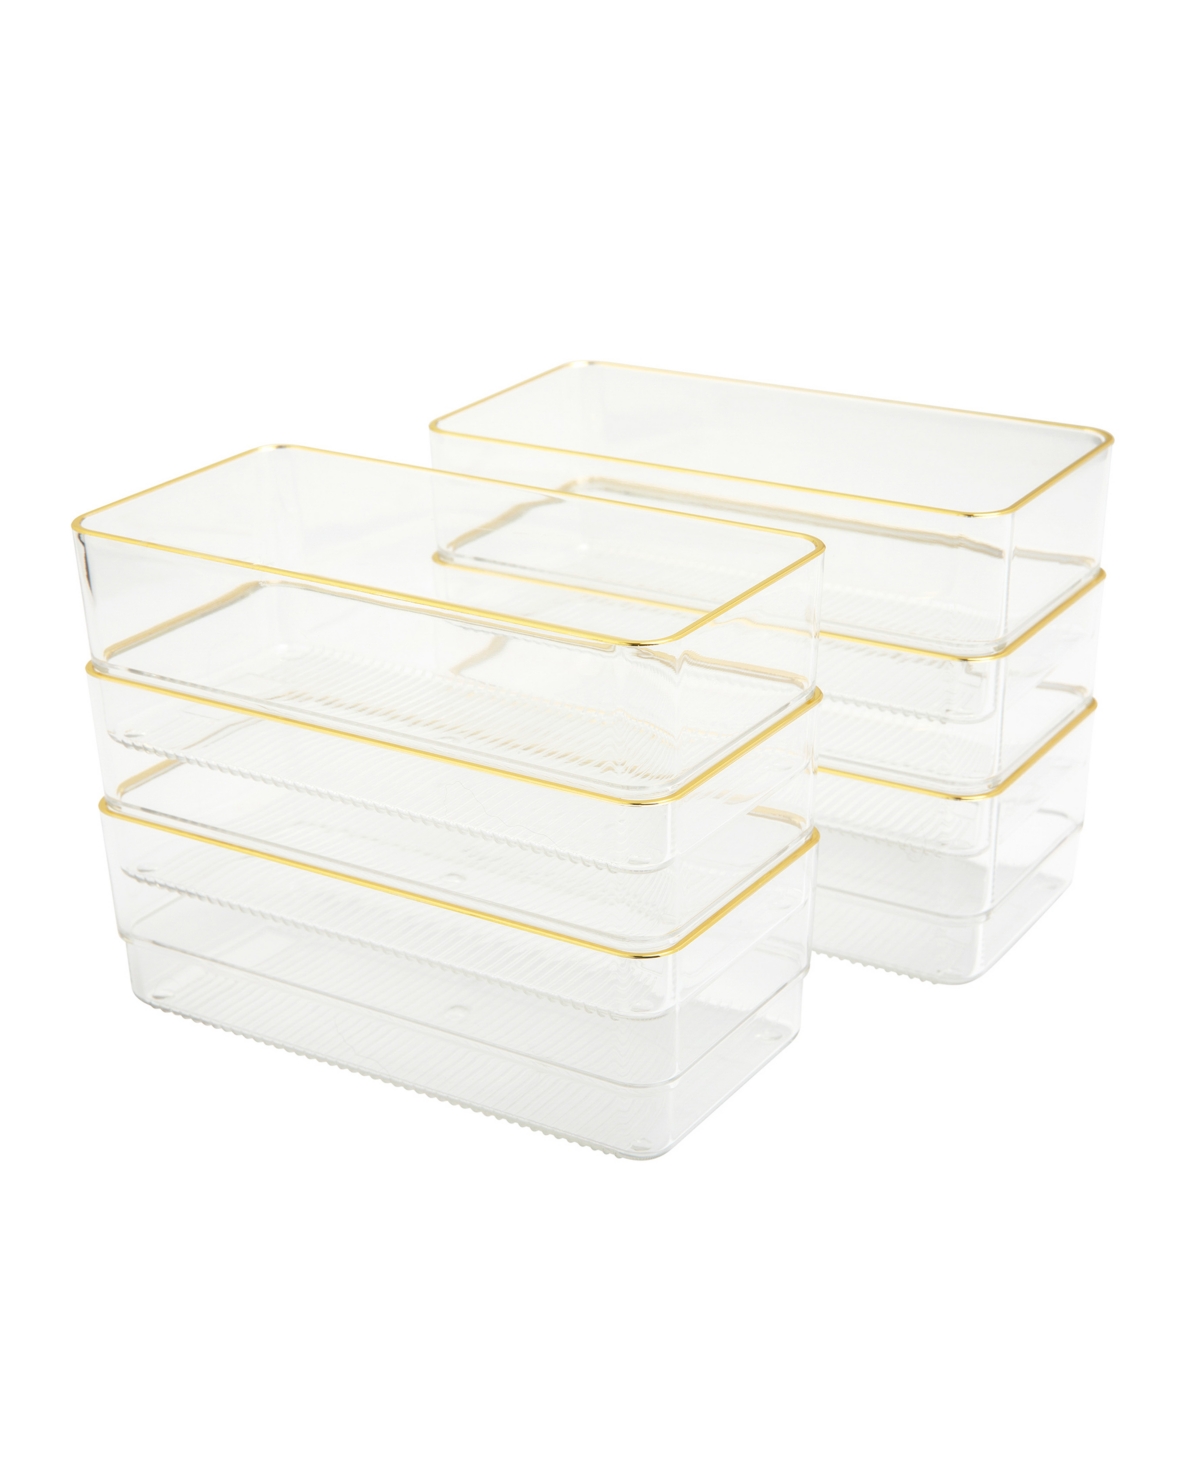 Kerry 6 Piece Plastic Stackable Office Desk Drawer Organizers, 6" x 3" - Clear, Gold Trim